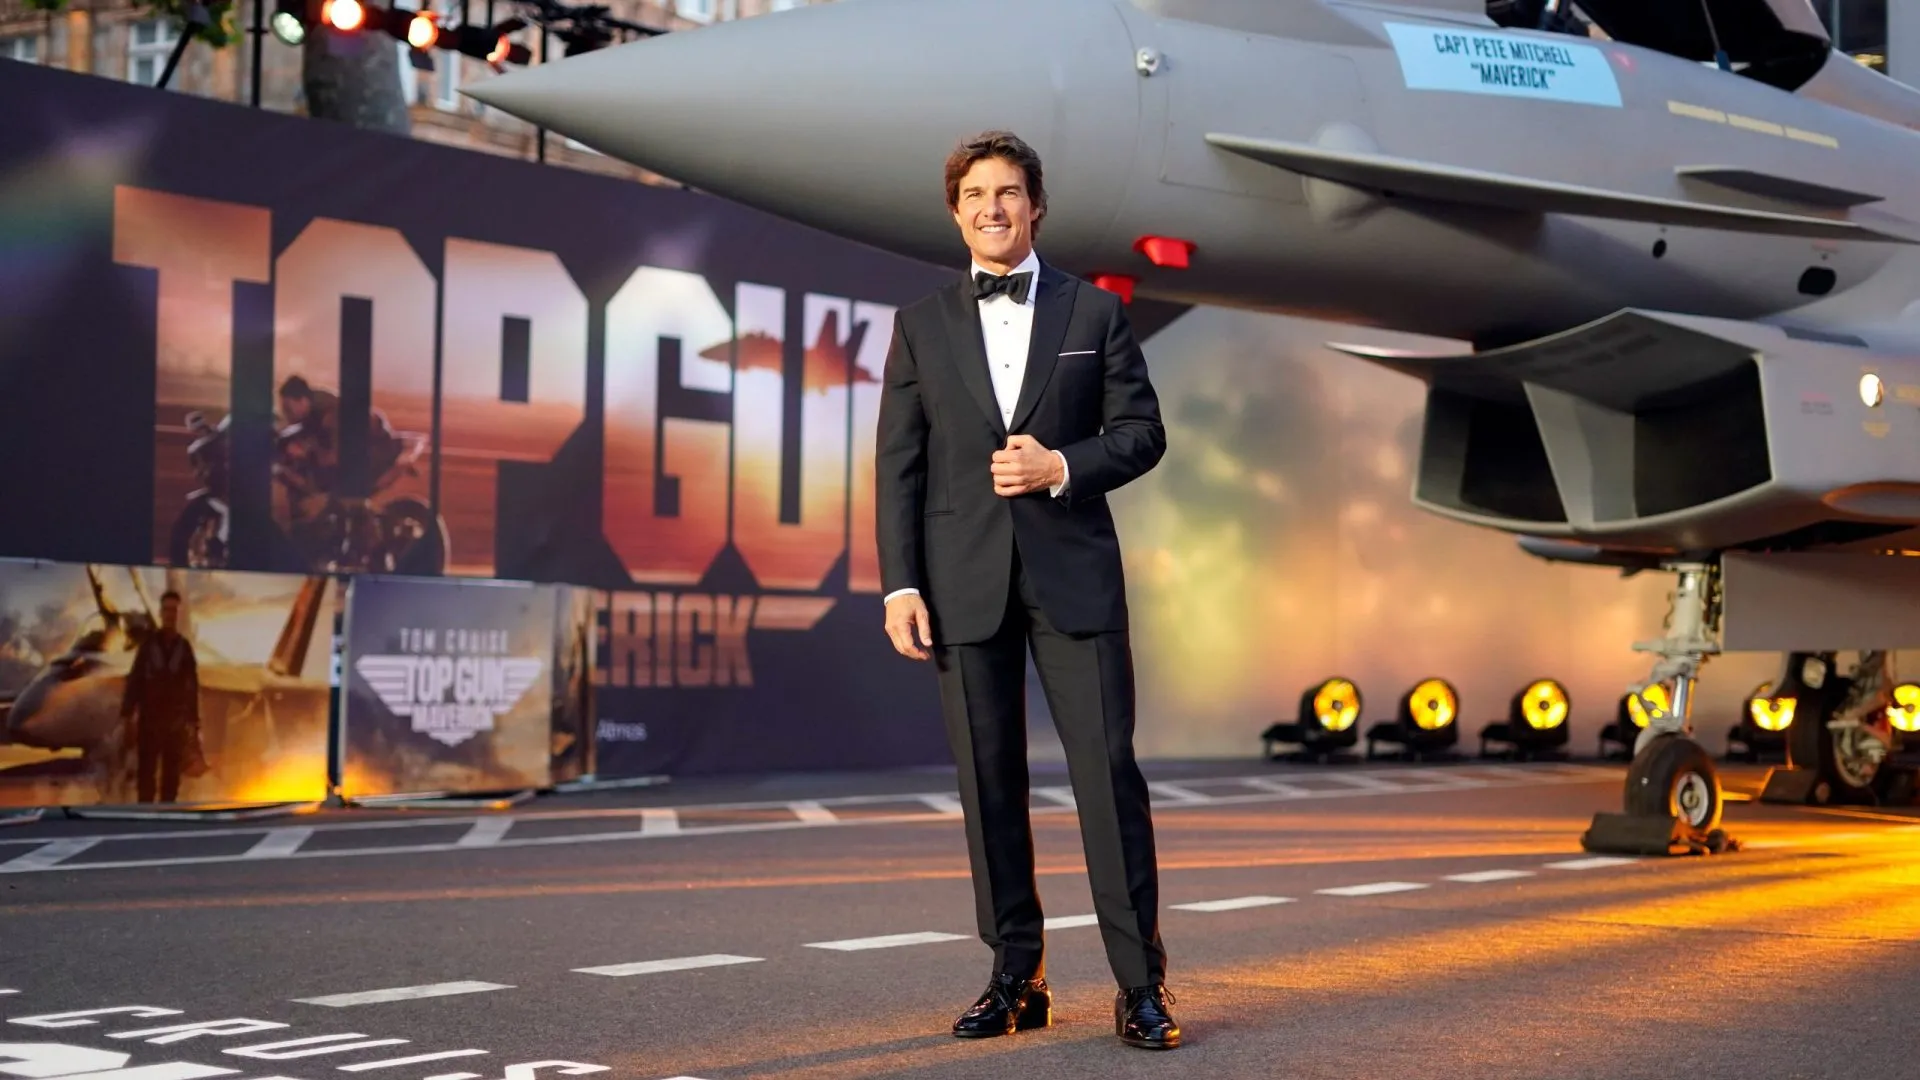 Mandatory Credit: Photo by Alberto Pezzali/AP/Shutterstock (12947291ak)Tom Cruise poses for the media during the 'Top Gun Maverick' UK premiere at a central London cinema, onTop Gun Maverick Premiere, London, United Kingdom - 19 May 2022.